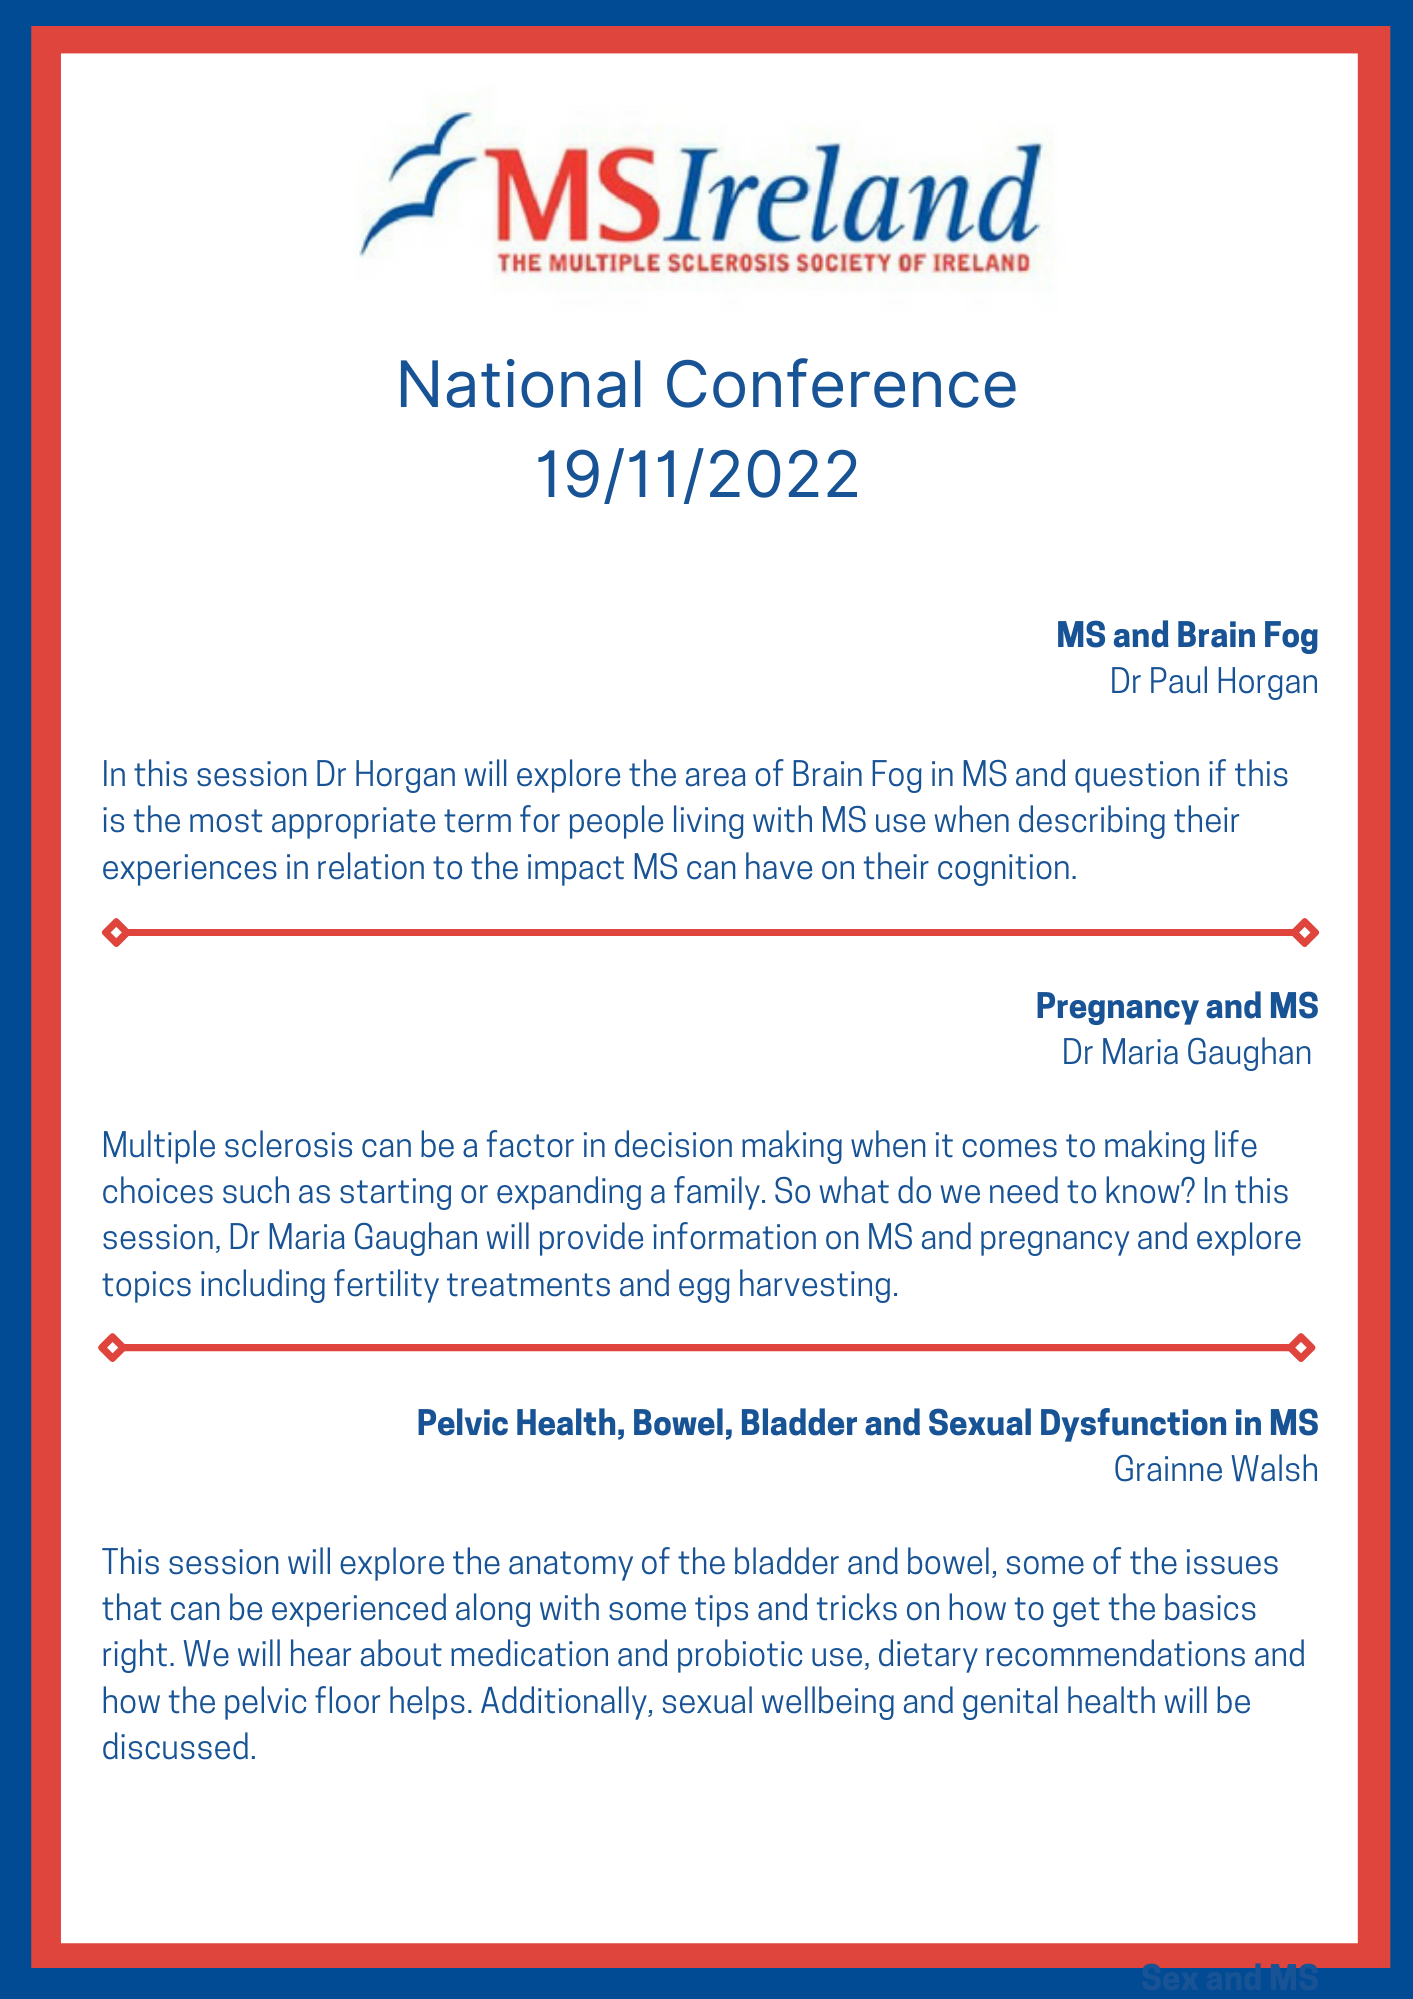 MS Ireland National Conference 2022 list of talks and speakers 1